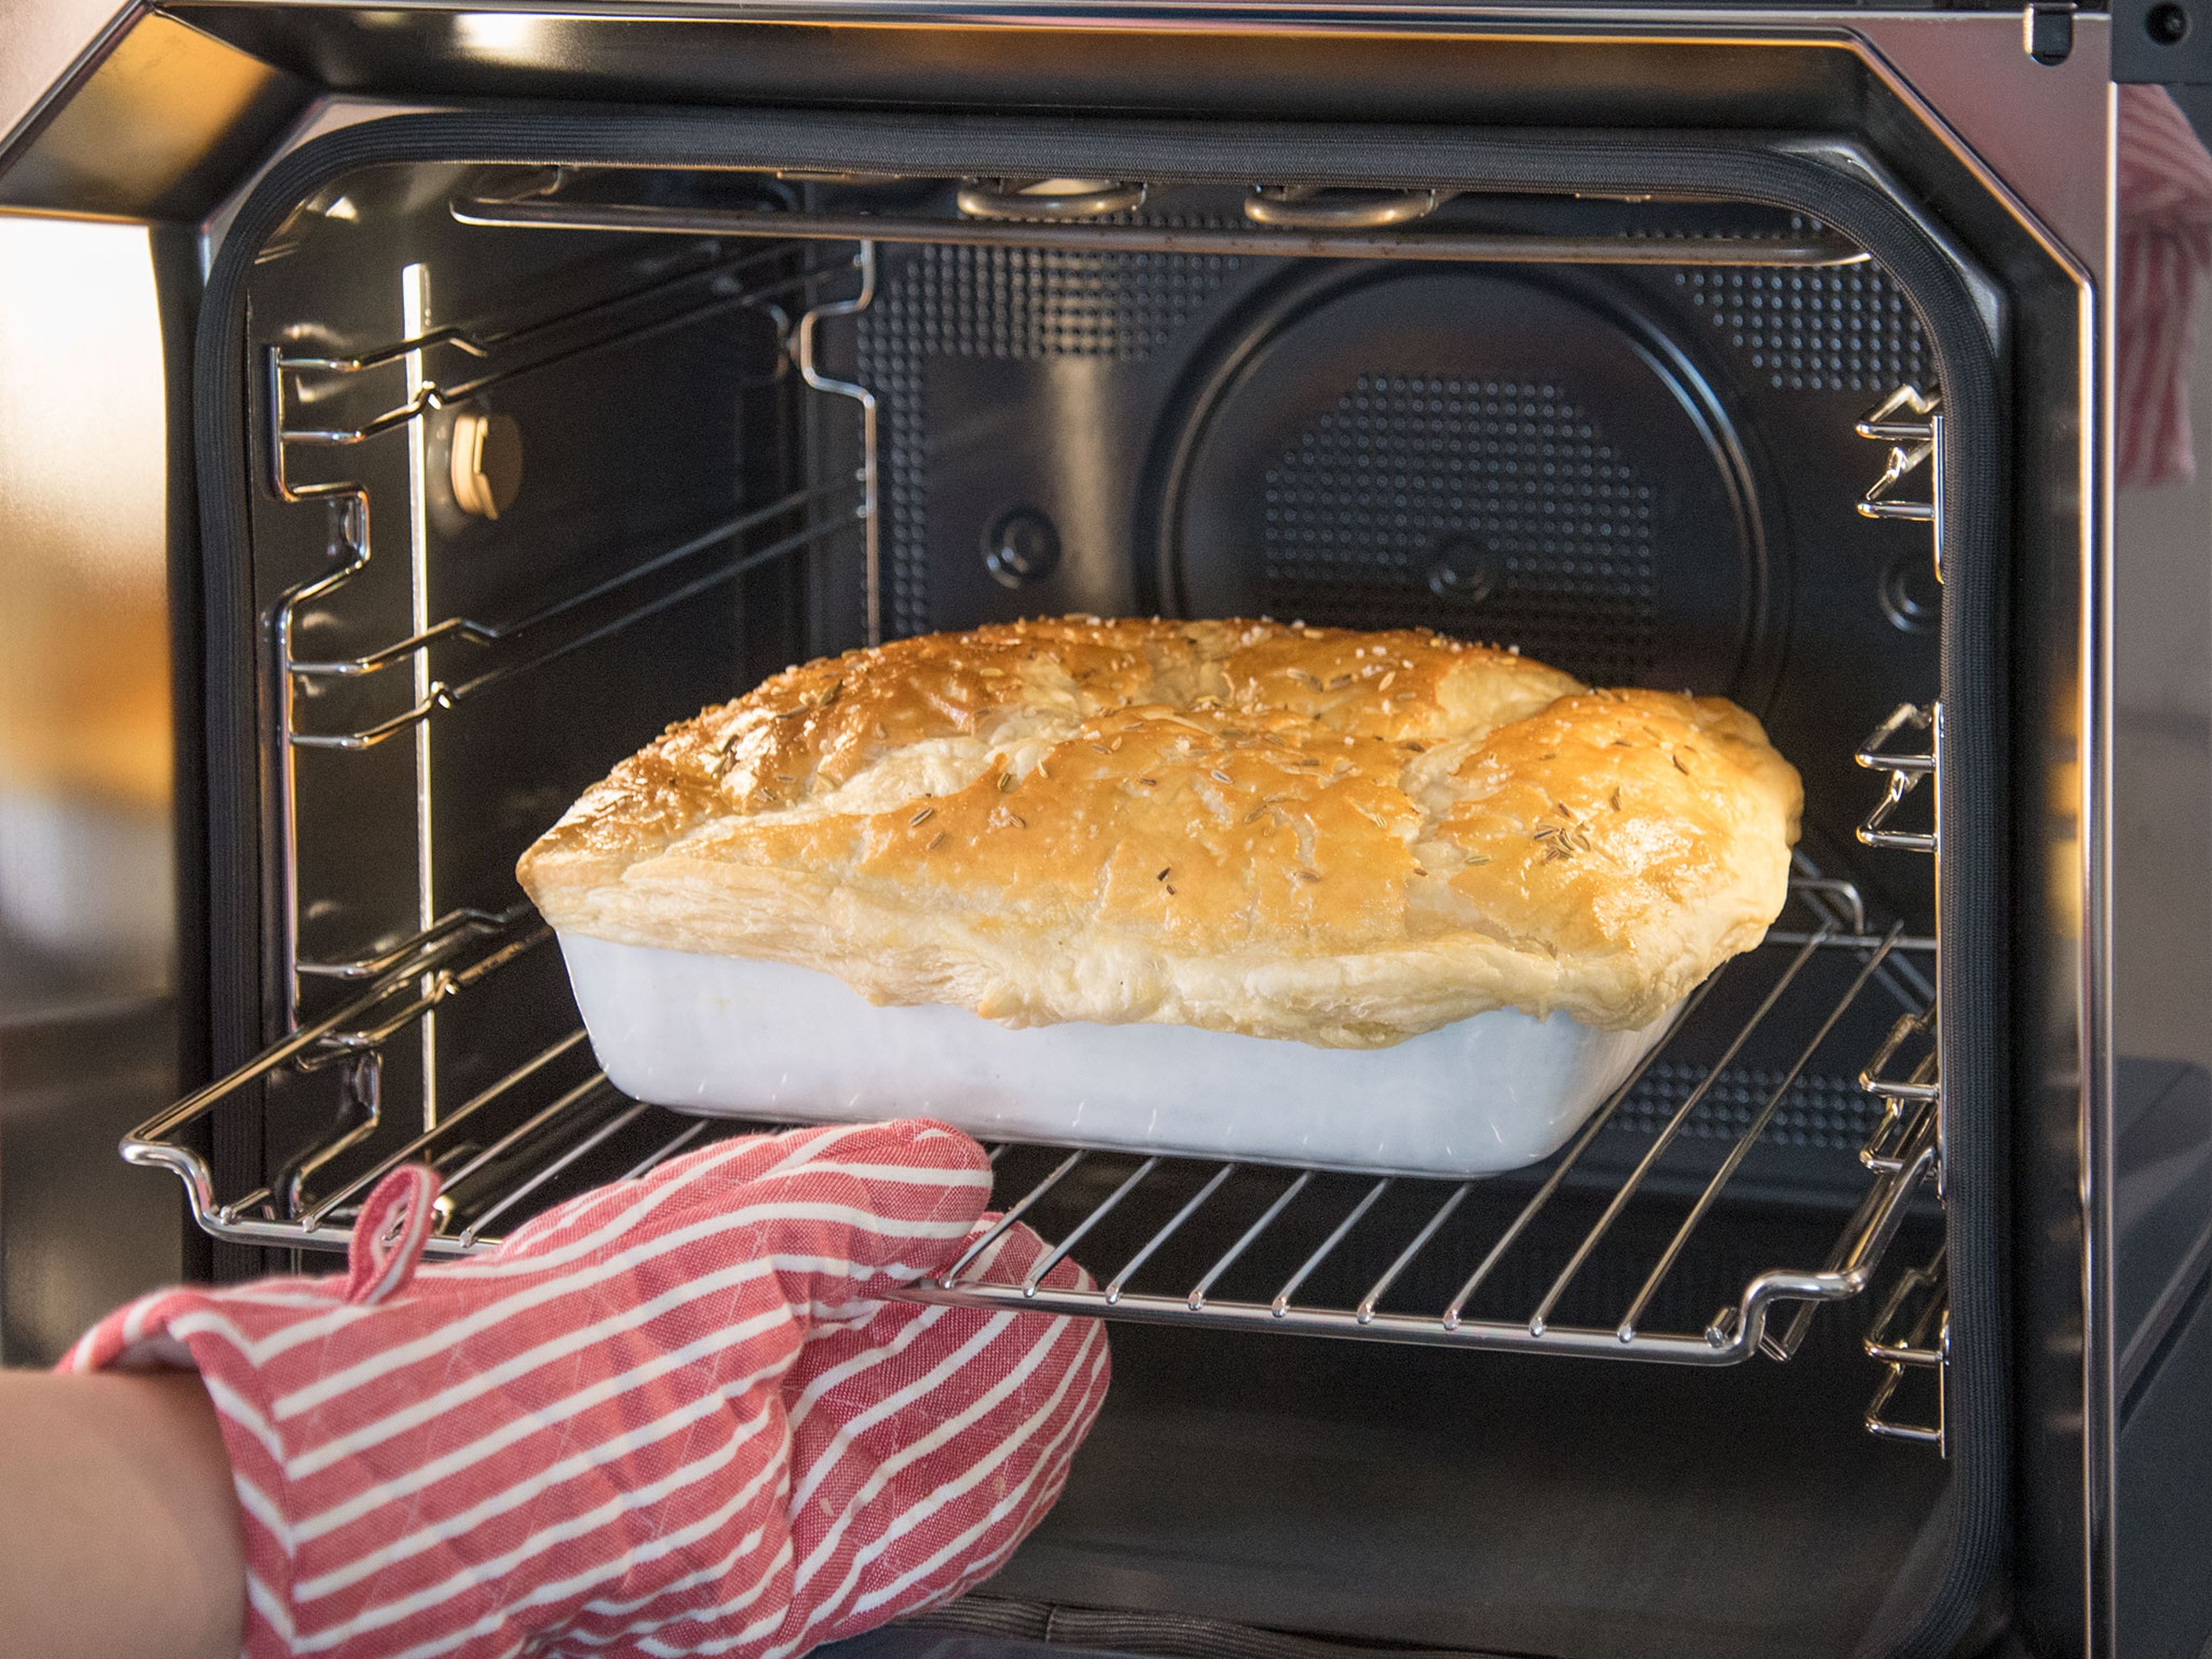 Start the automatic program for Fish / Salmon Pie; baking time is approx. 14 min. When dialog oven is preheated, transfer salmon to oven to bake on level 2. Enjoy!